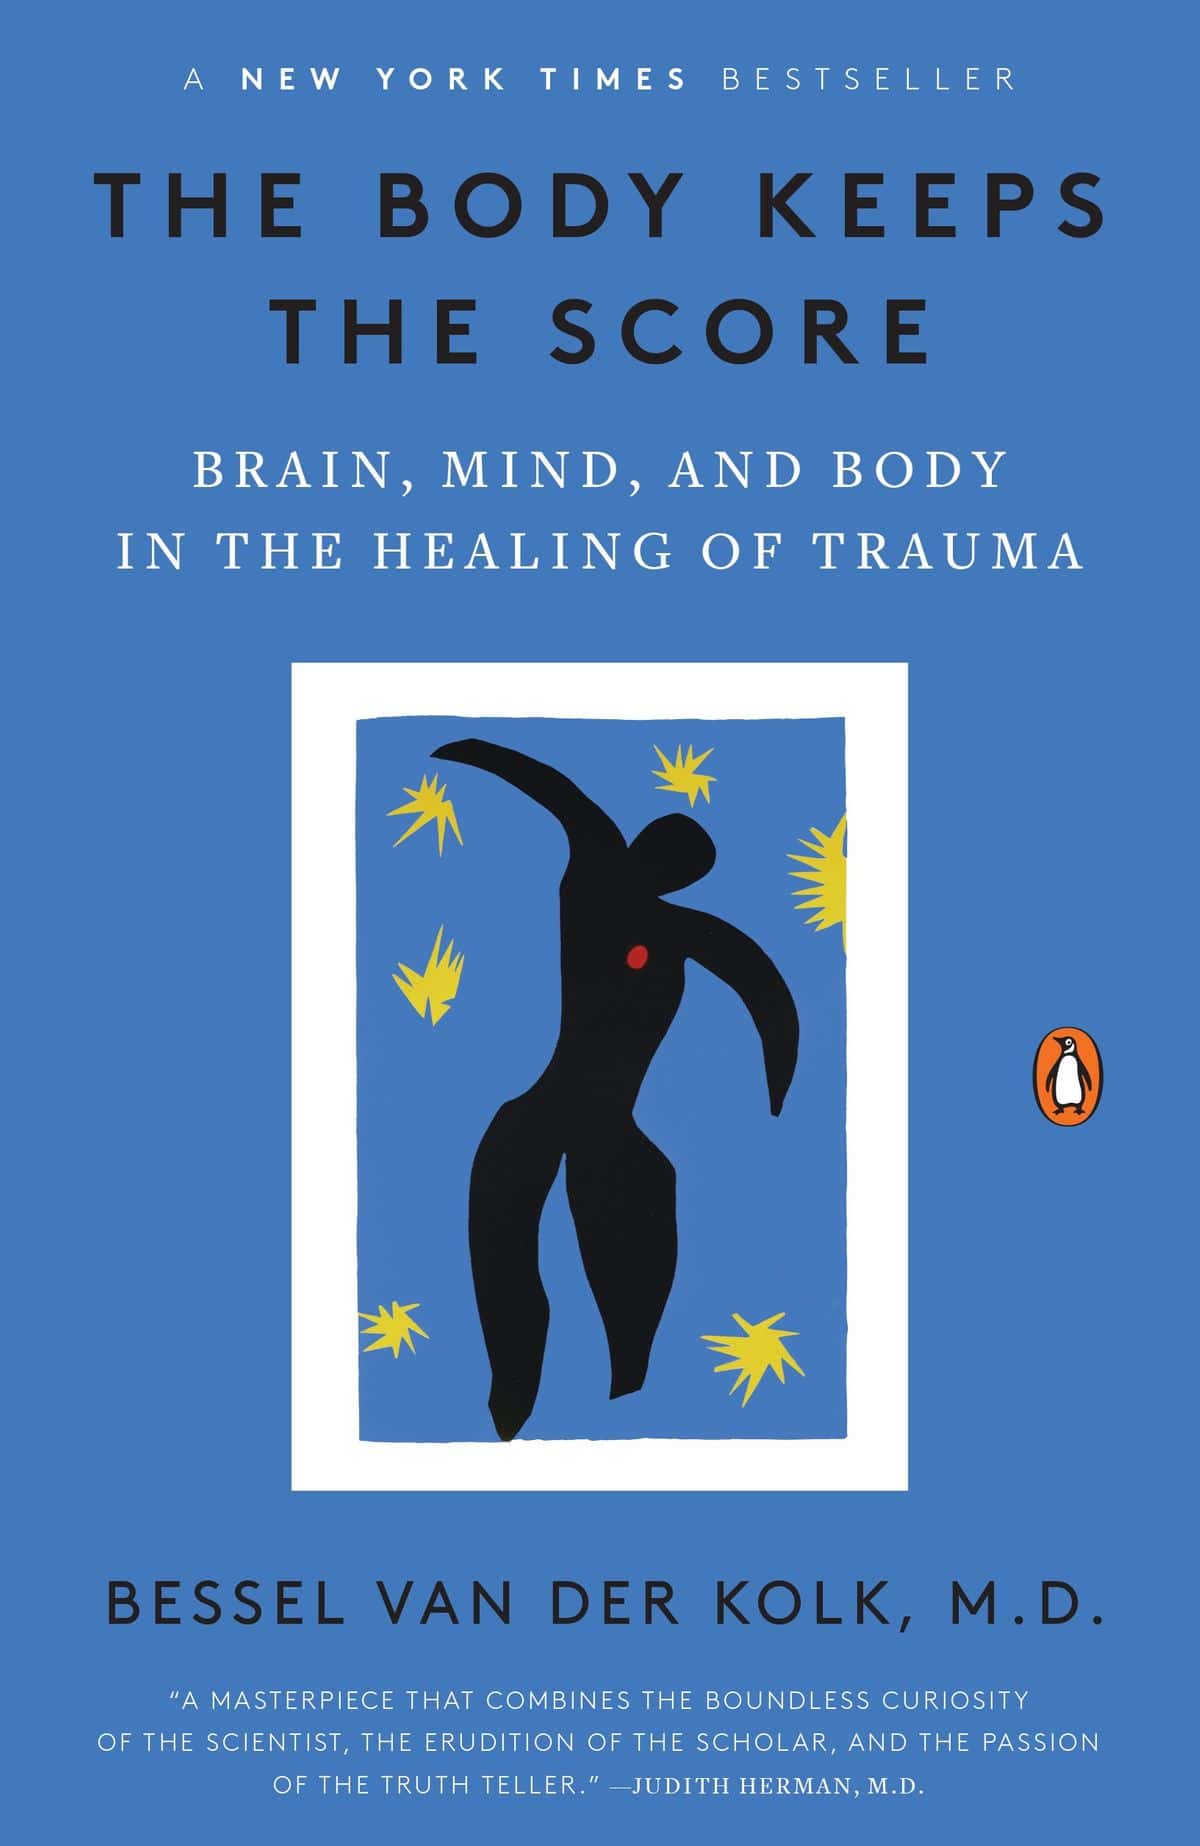 <p>Bessel van der Kolk's book <em>The Body Keeps the Score</em> resonates strongly with readers — just like our trauma resonates with our bodies in ways we'll never fully comprehend. </p>    <p>Dr. Kolk's book explores the long-lasting effects of trauma on the human body and mind, explaining the true impact of our hardships on our overall well-being. The book's comprehensive approach to trauma and healing offers valuable insights and hope for those seeking to understand and overcome past adversities.</p>    <ul> <li><strong>Author:</strong> Bessel van der Kolk, M.D.</li>    <li><strong>Page count:</strong> 464</li>    <li><strong>First published:</strong> 2014</li> </ul>